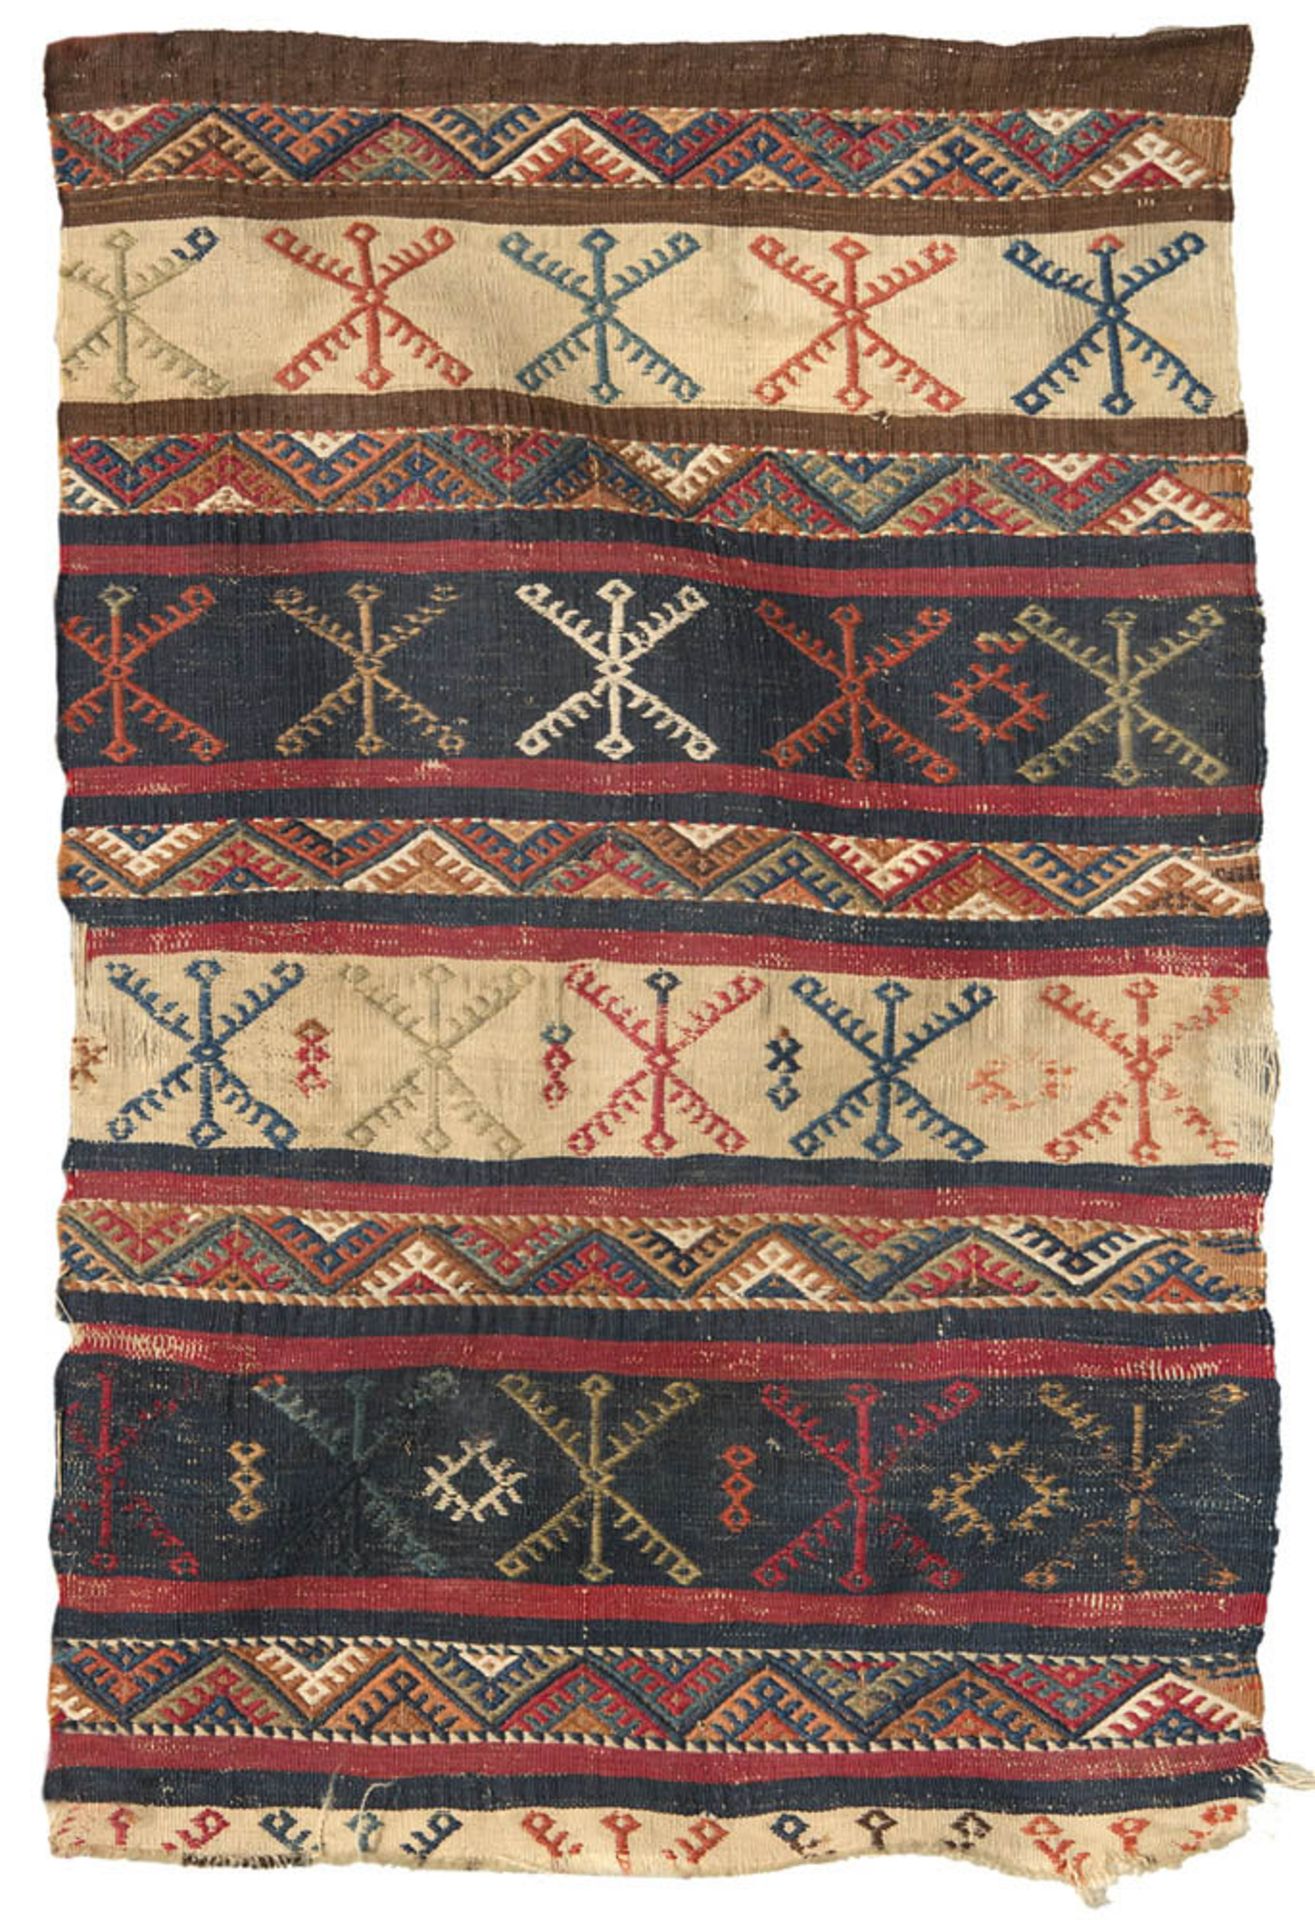 FRAGMENT OF SADDLE CAUCASIAN KILIM, 19TH CENTURY with design with multicolored bands in crosses